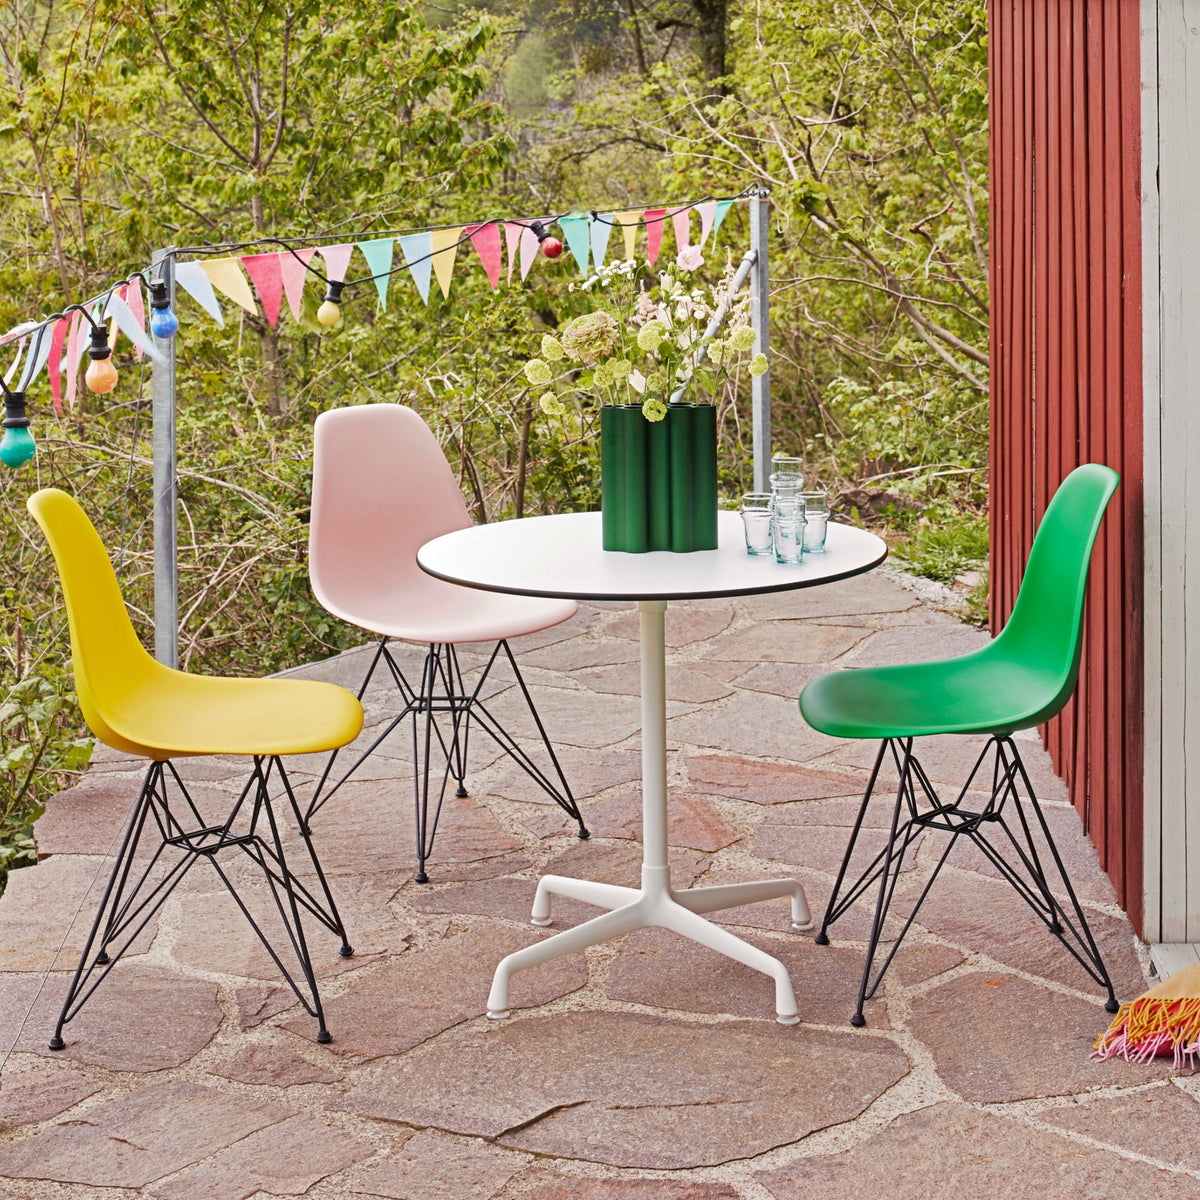 Vitra Eames Plastic Side Chair DSR Powder Coated for Outdoor Use. Patio Setting